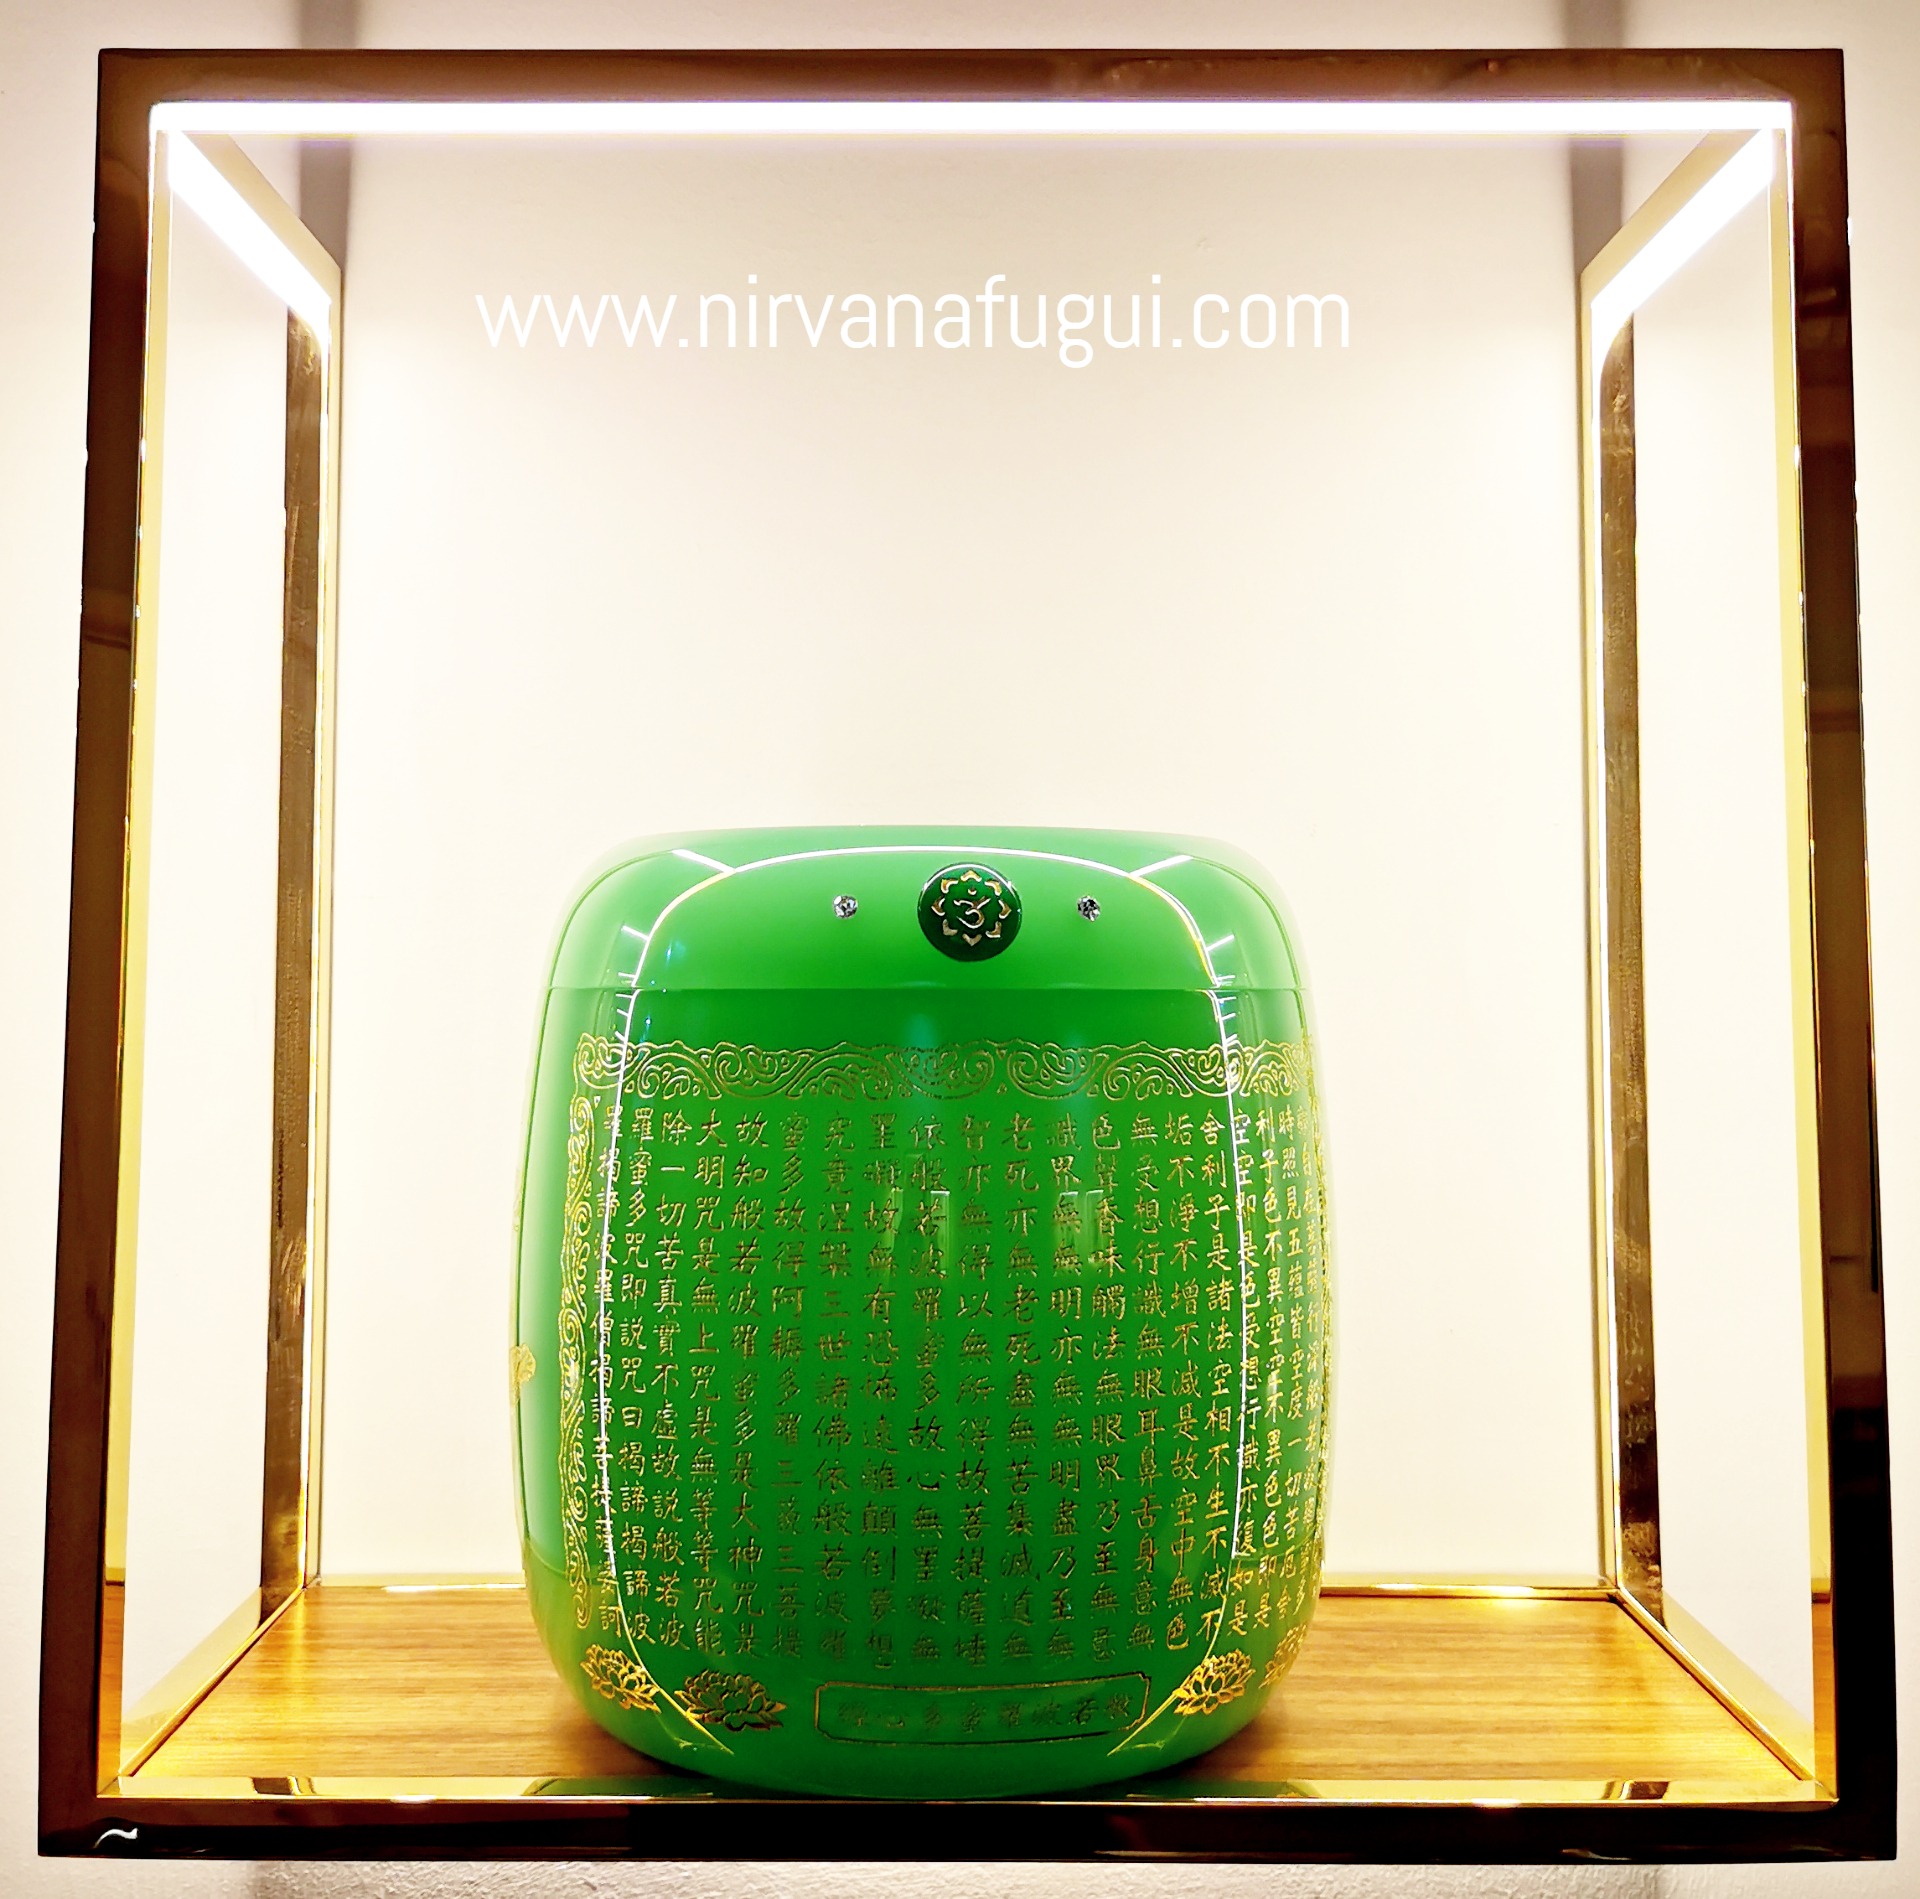 Nirvana Singapore provides the high standard urn to store the cremation ashes in the columbarium